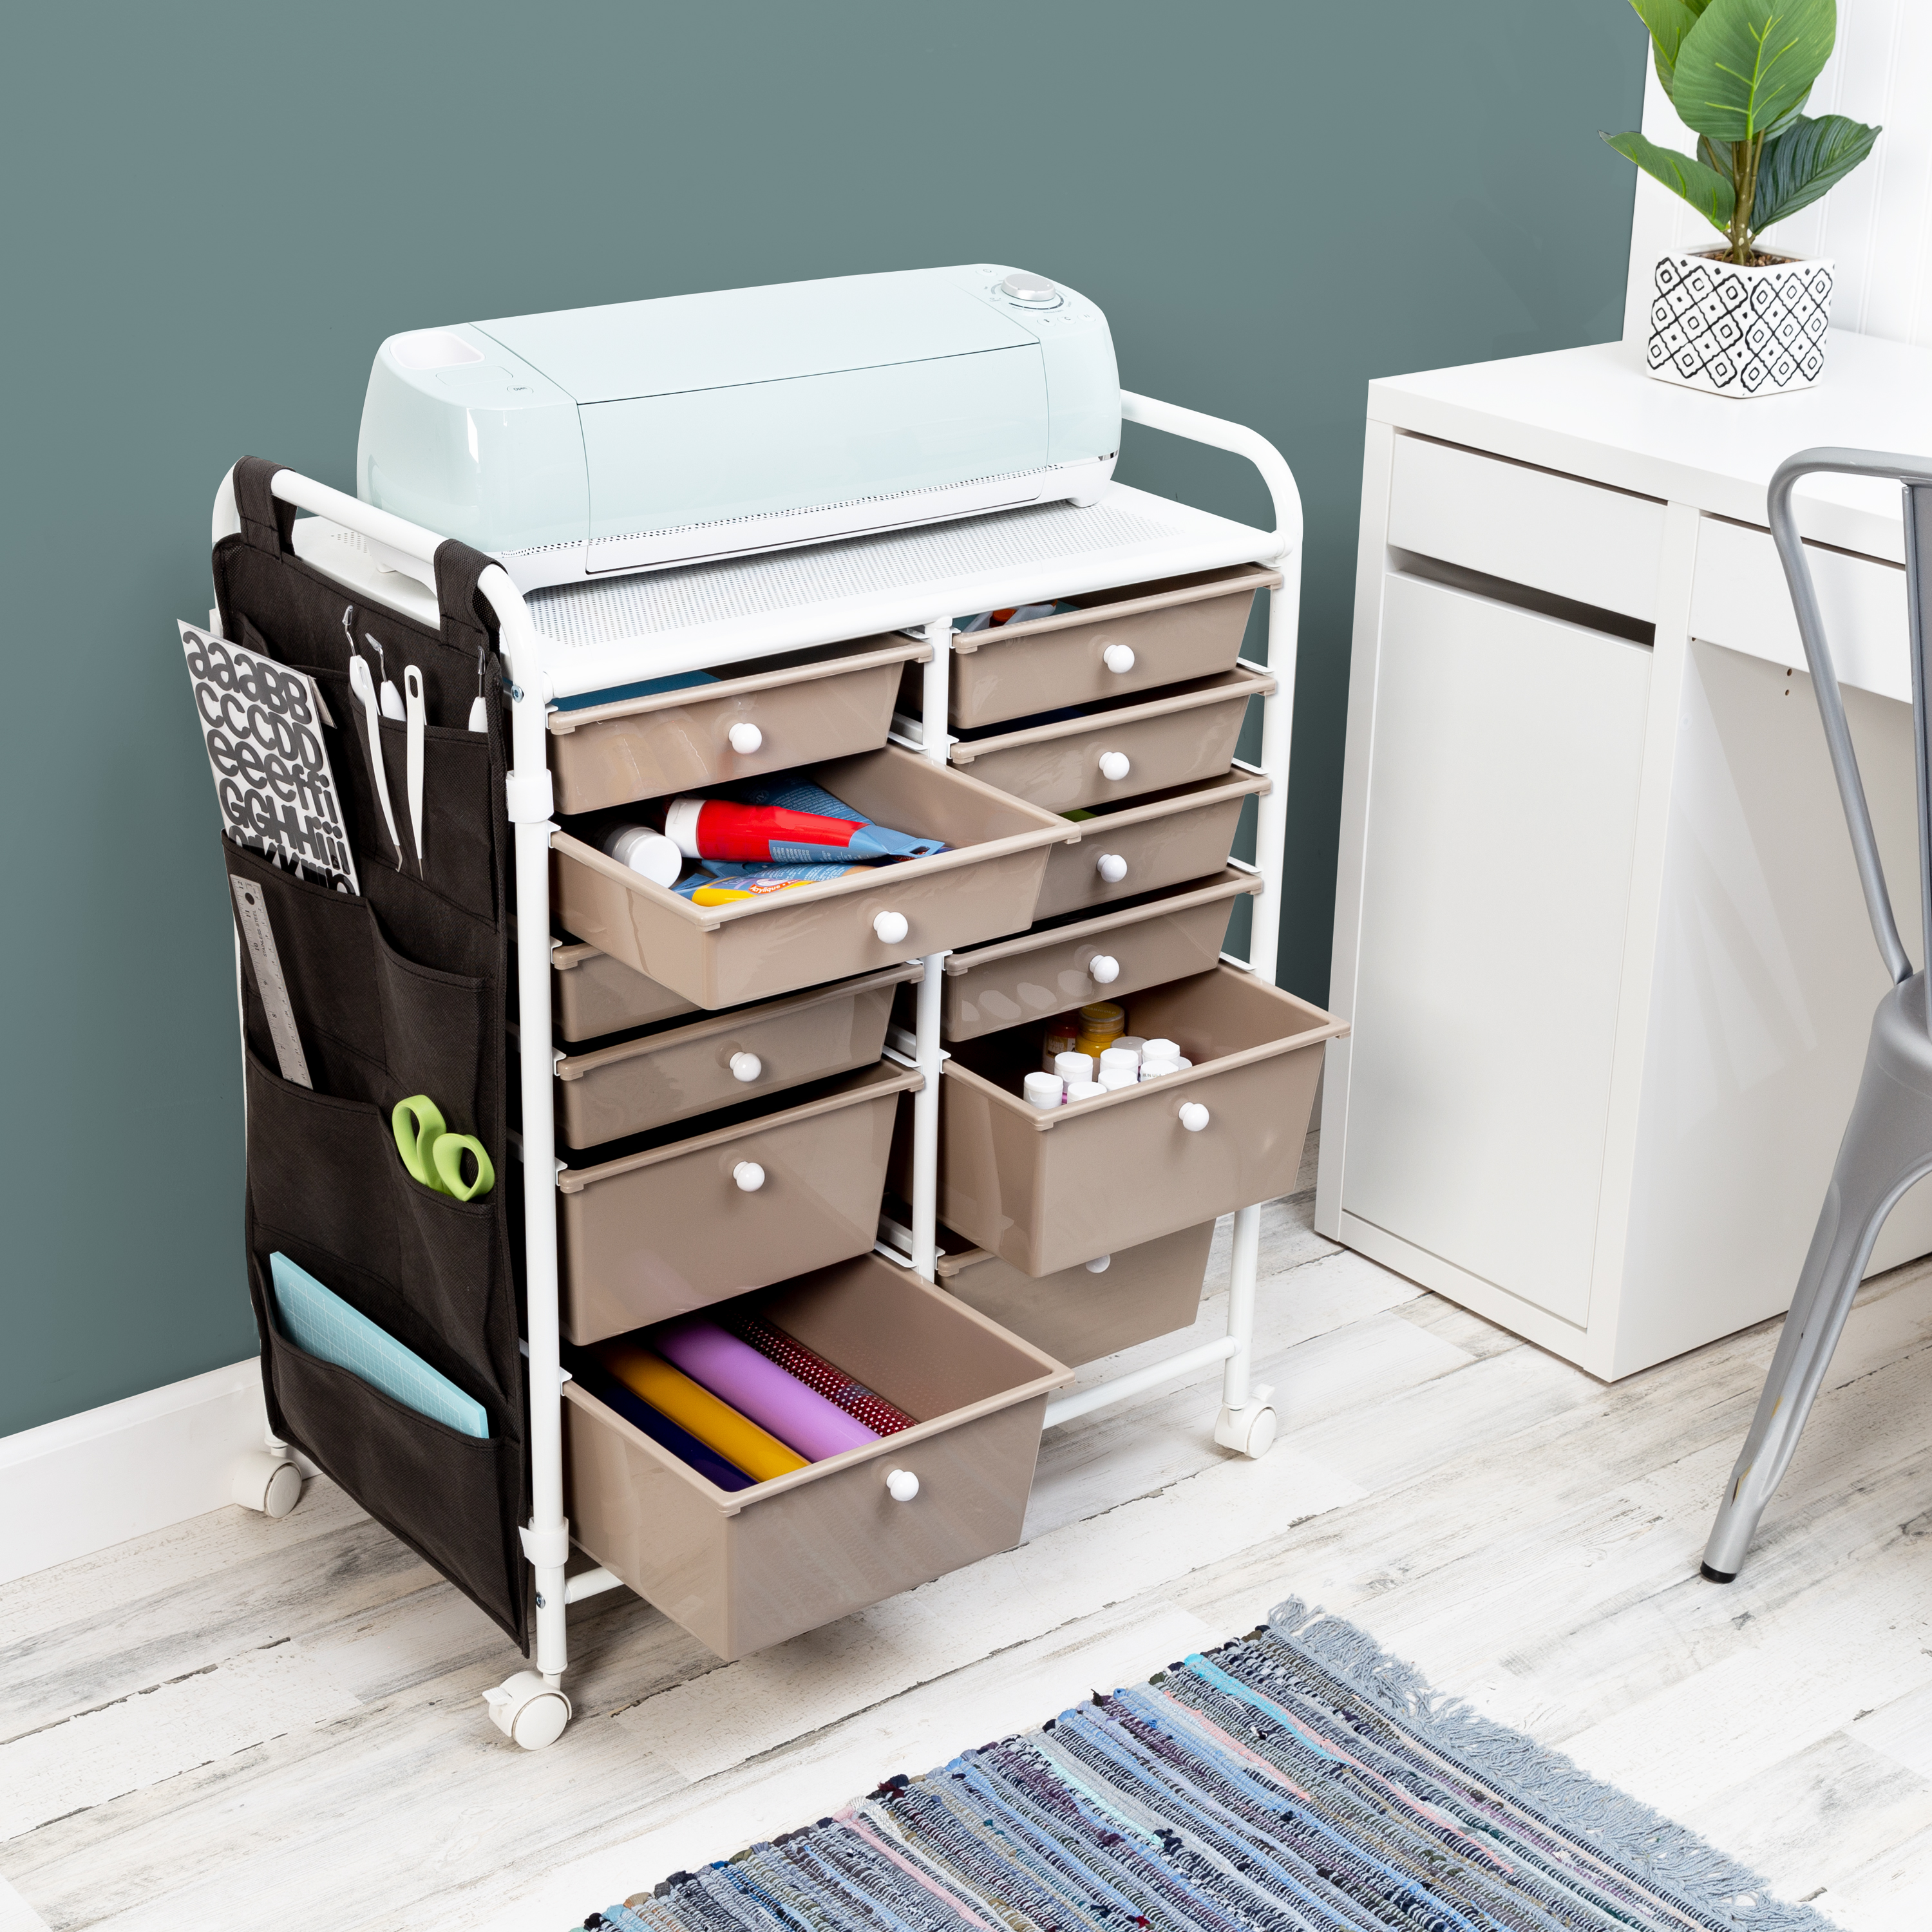 Honey-Can-Do 12-Drawer Metal Rolling Storage Cart with Black Fabric Side Pockets, Beige/White - image 1 of 13